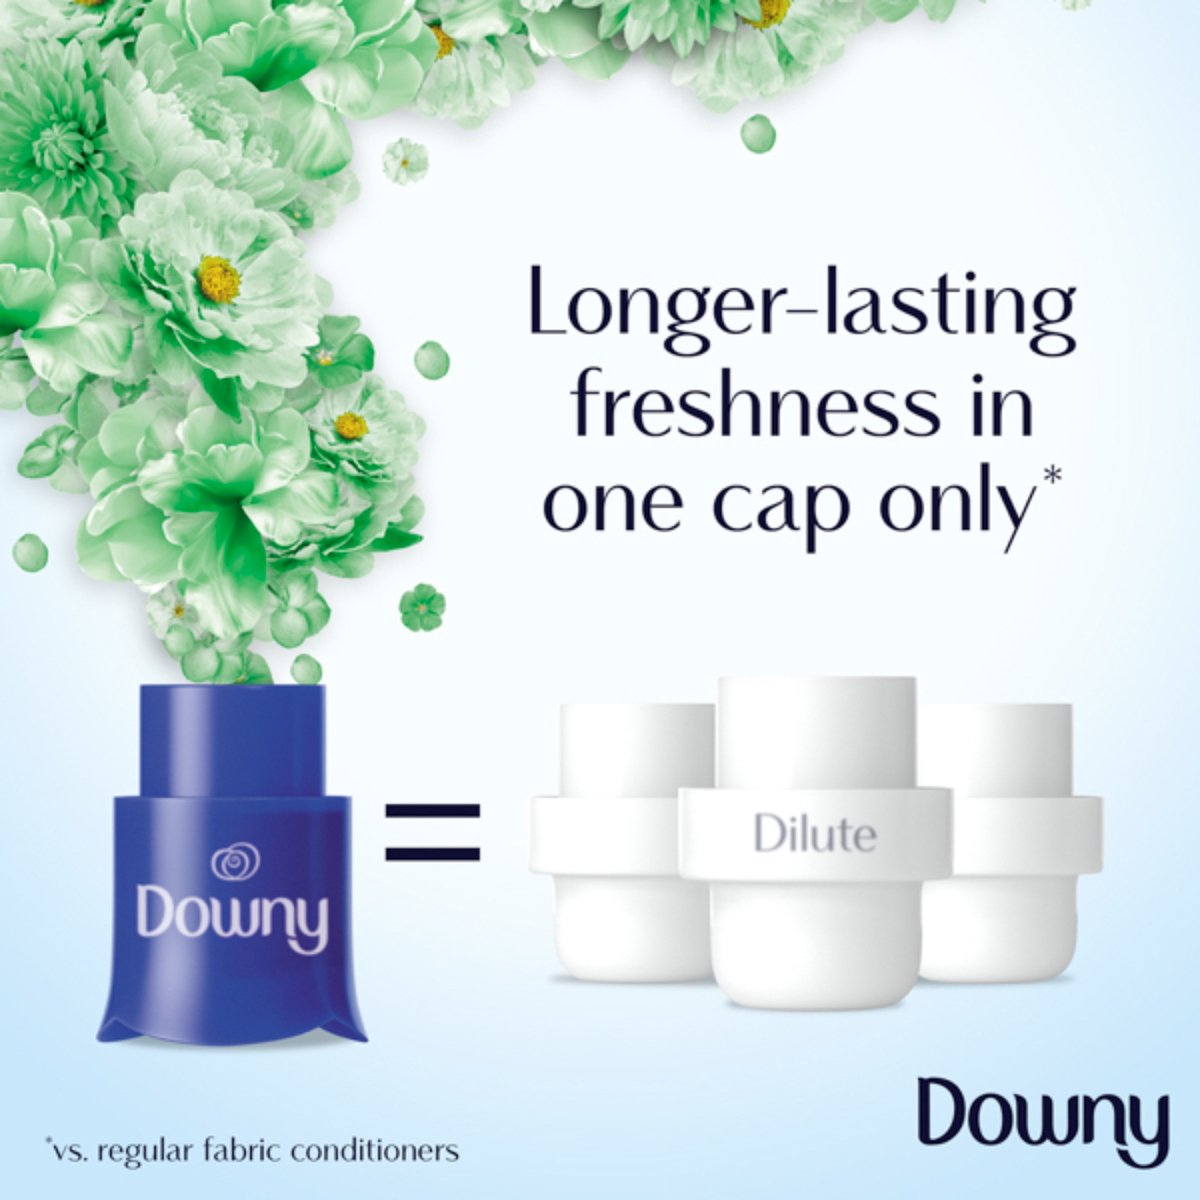 Downy Concentrate All-in-One Dream Garden Fabric Softener 2 Litres